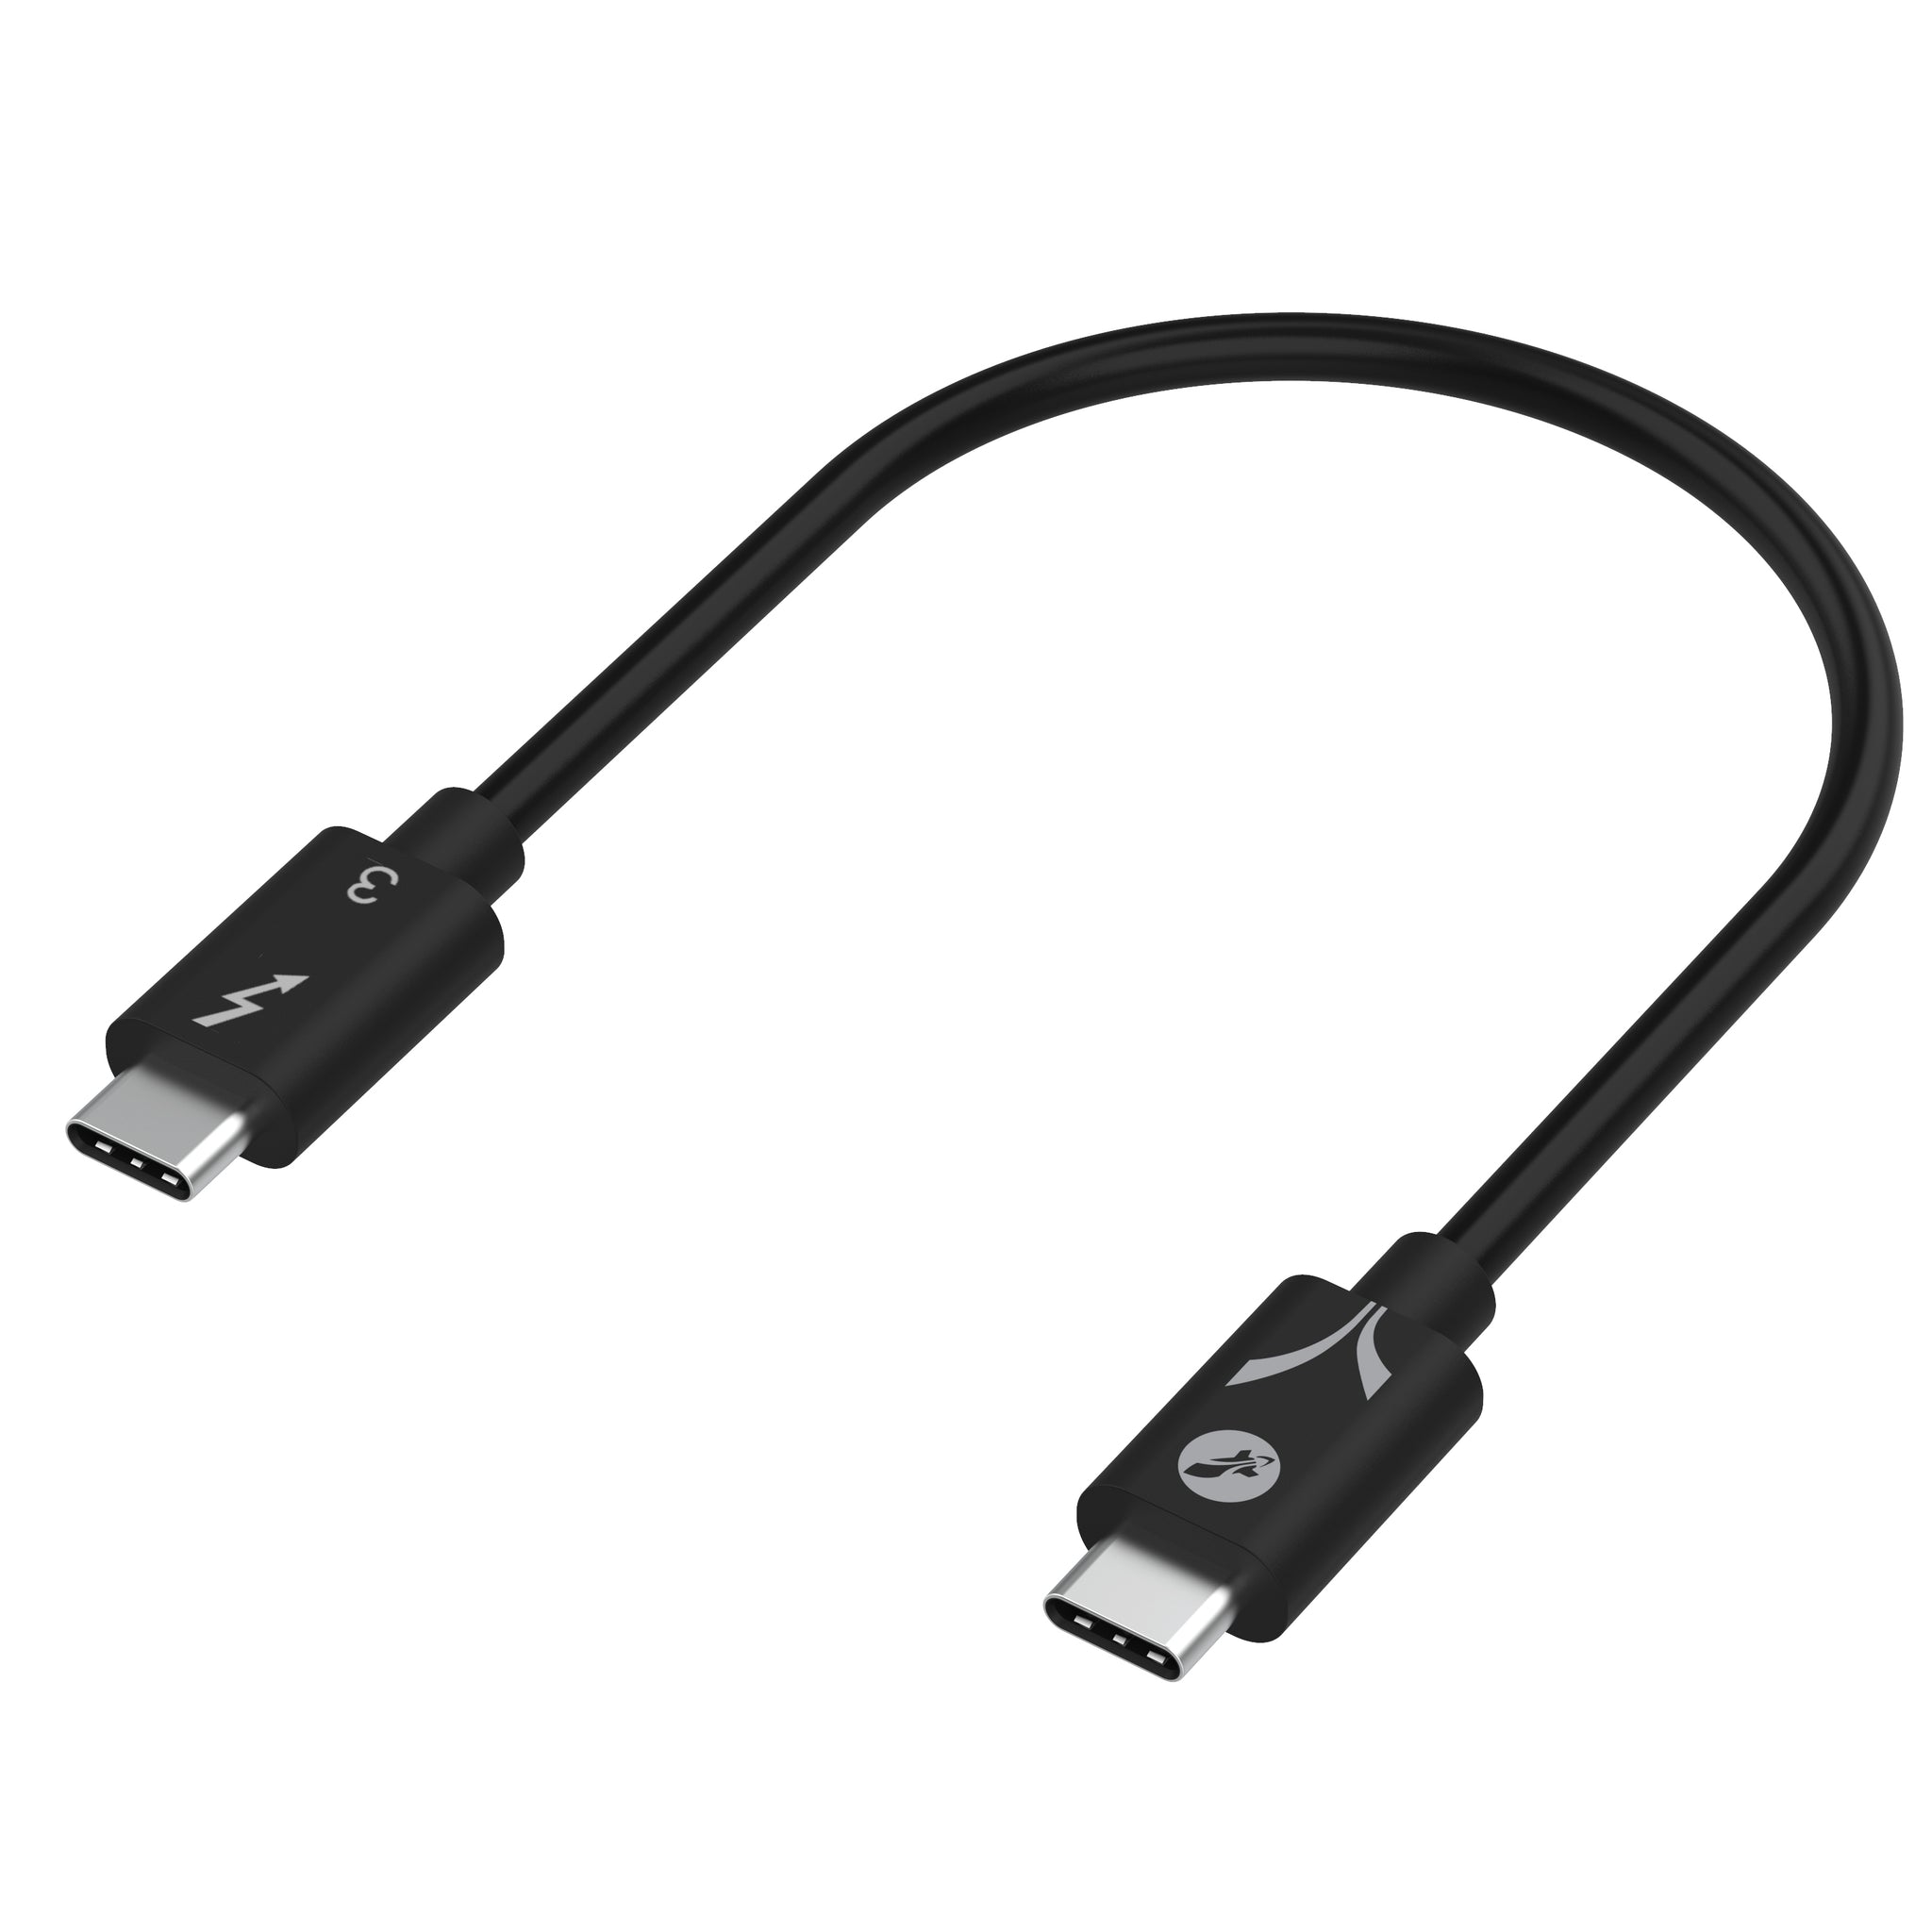 USB-C Cable, 5A Rated, Thunderbolt 3, 3m